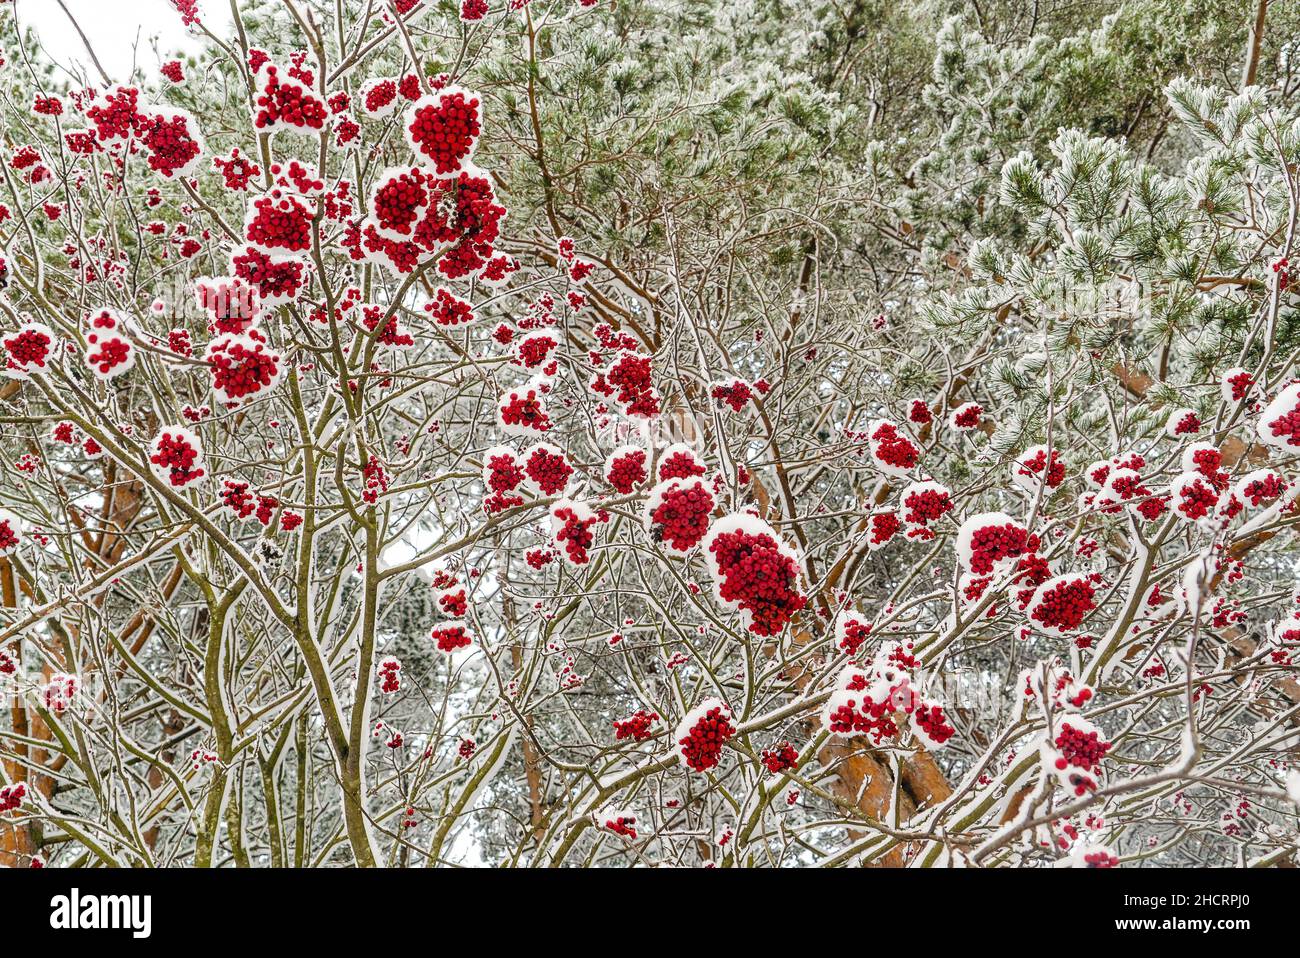 Clusters of red mountain ash on the branches are sprinkled with white snow . Stock Photo